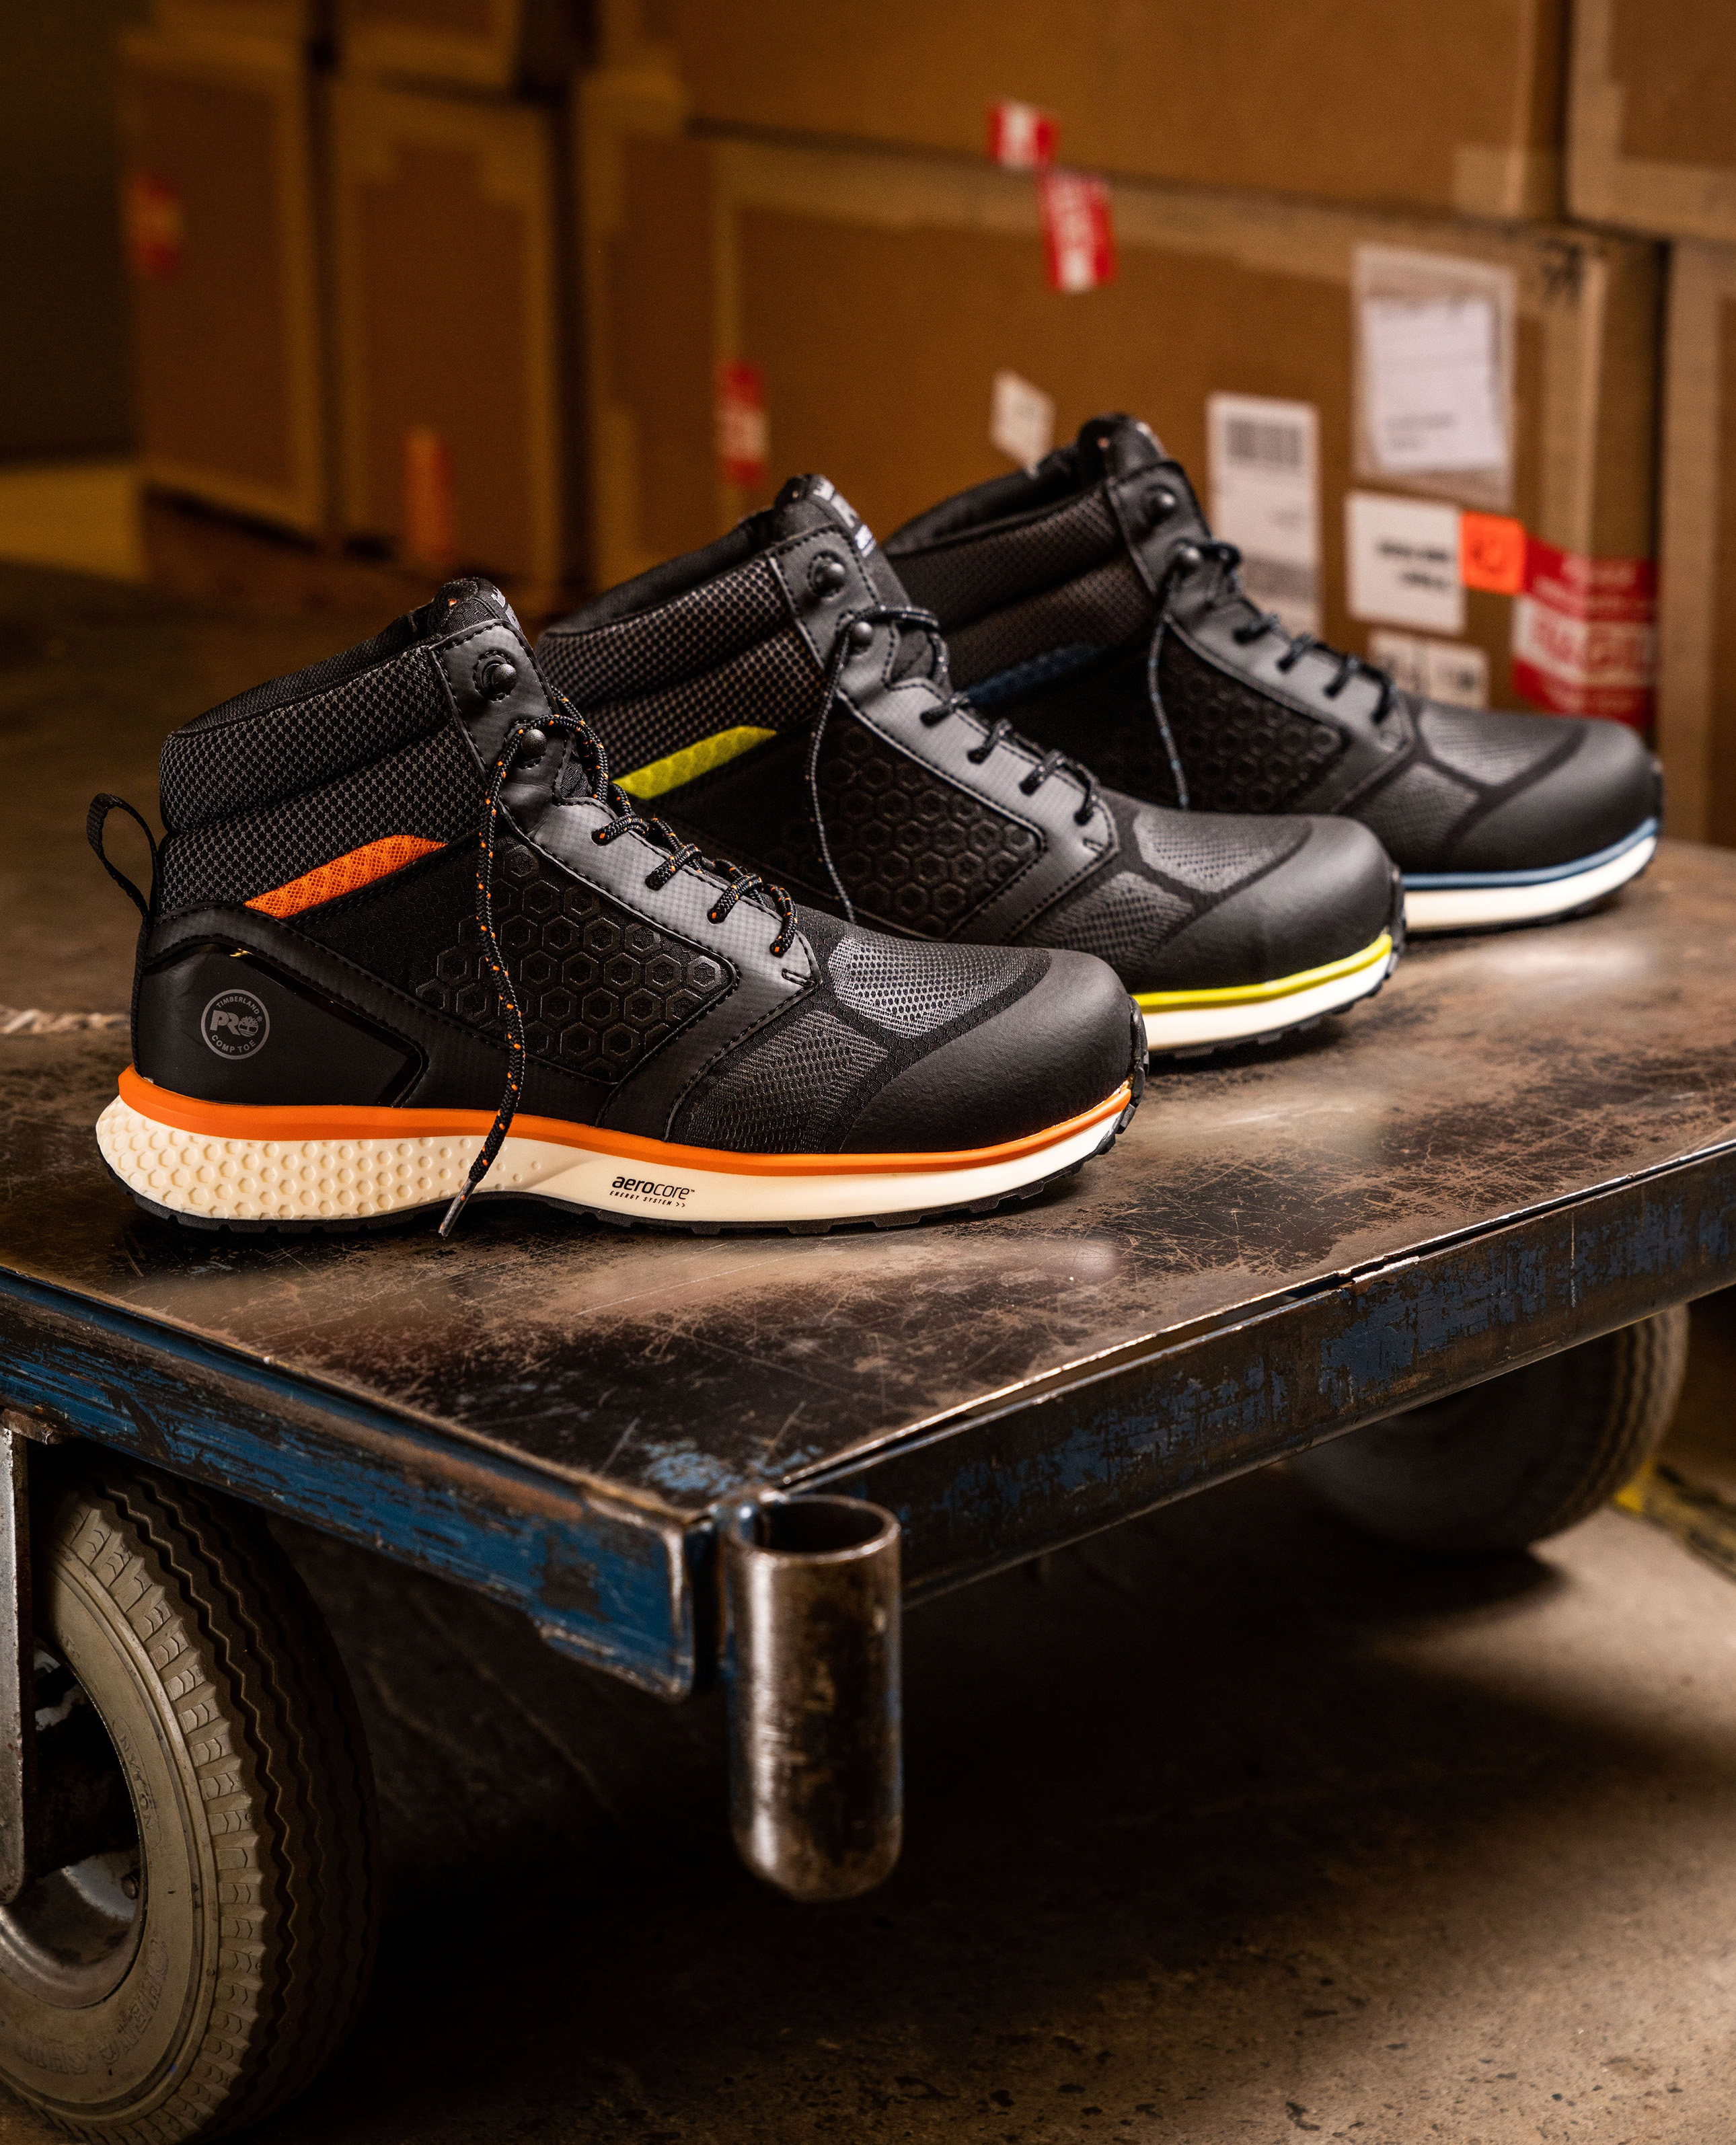 Timberland PRO Reaxion safety shoe